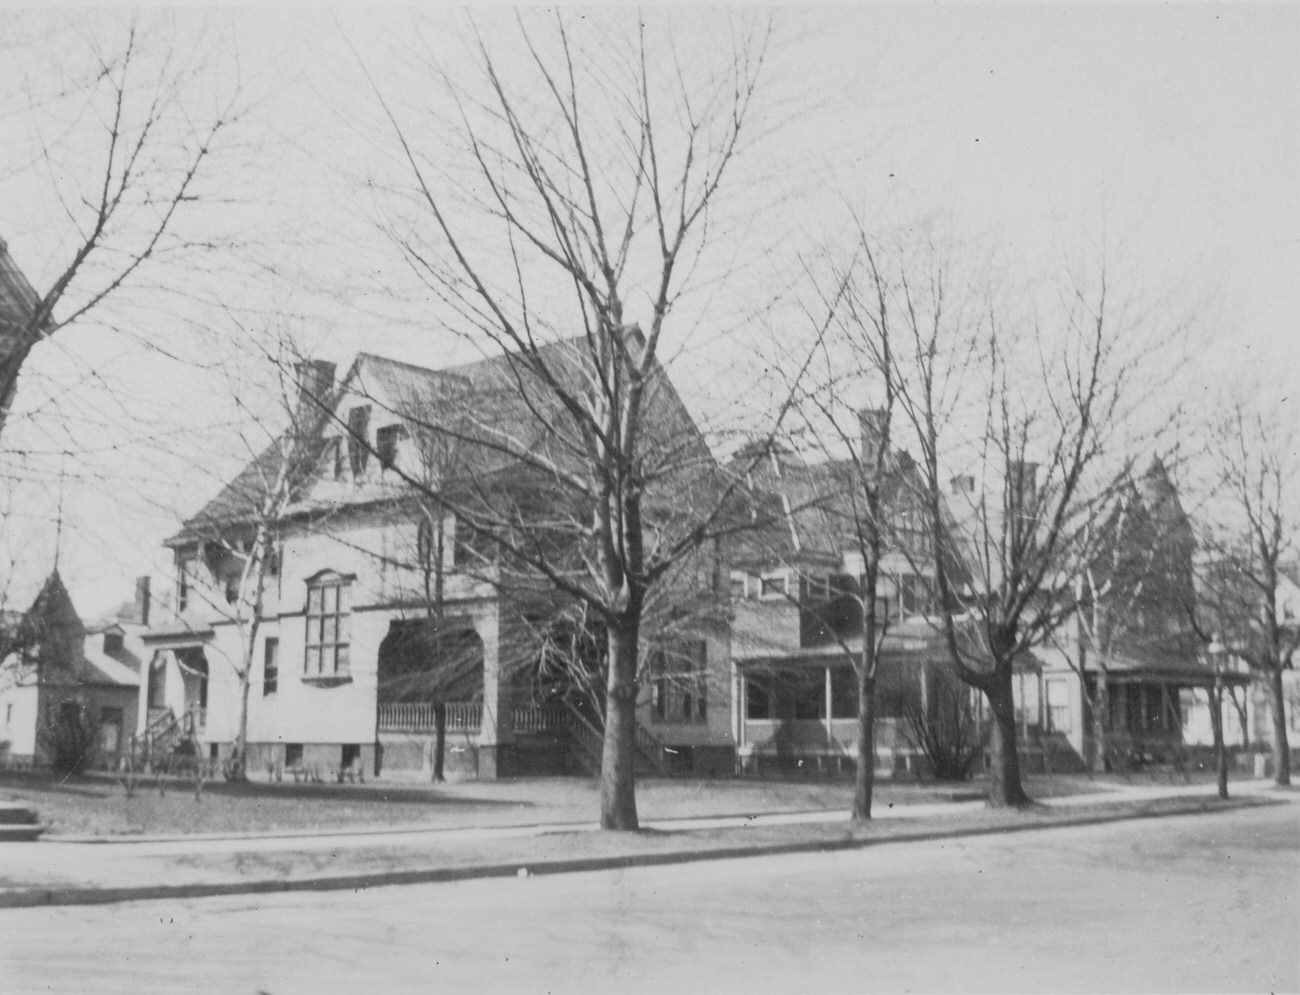 Grey Shingled House (Foreground) At 1916 Albrmarle Road, Near The Southwest Corner Of Ocean Avenue, 1923